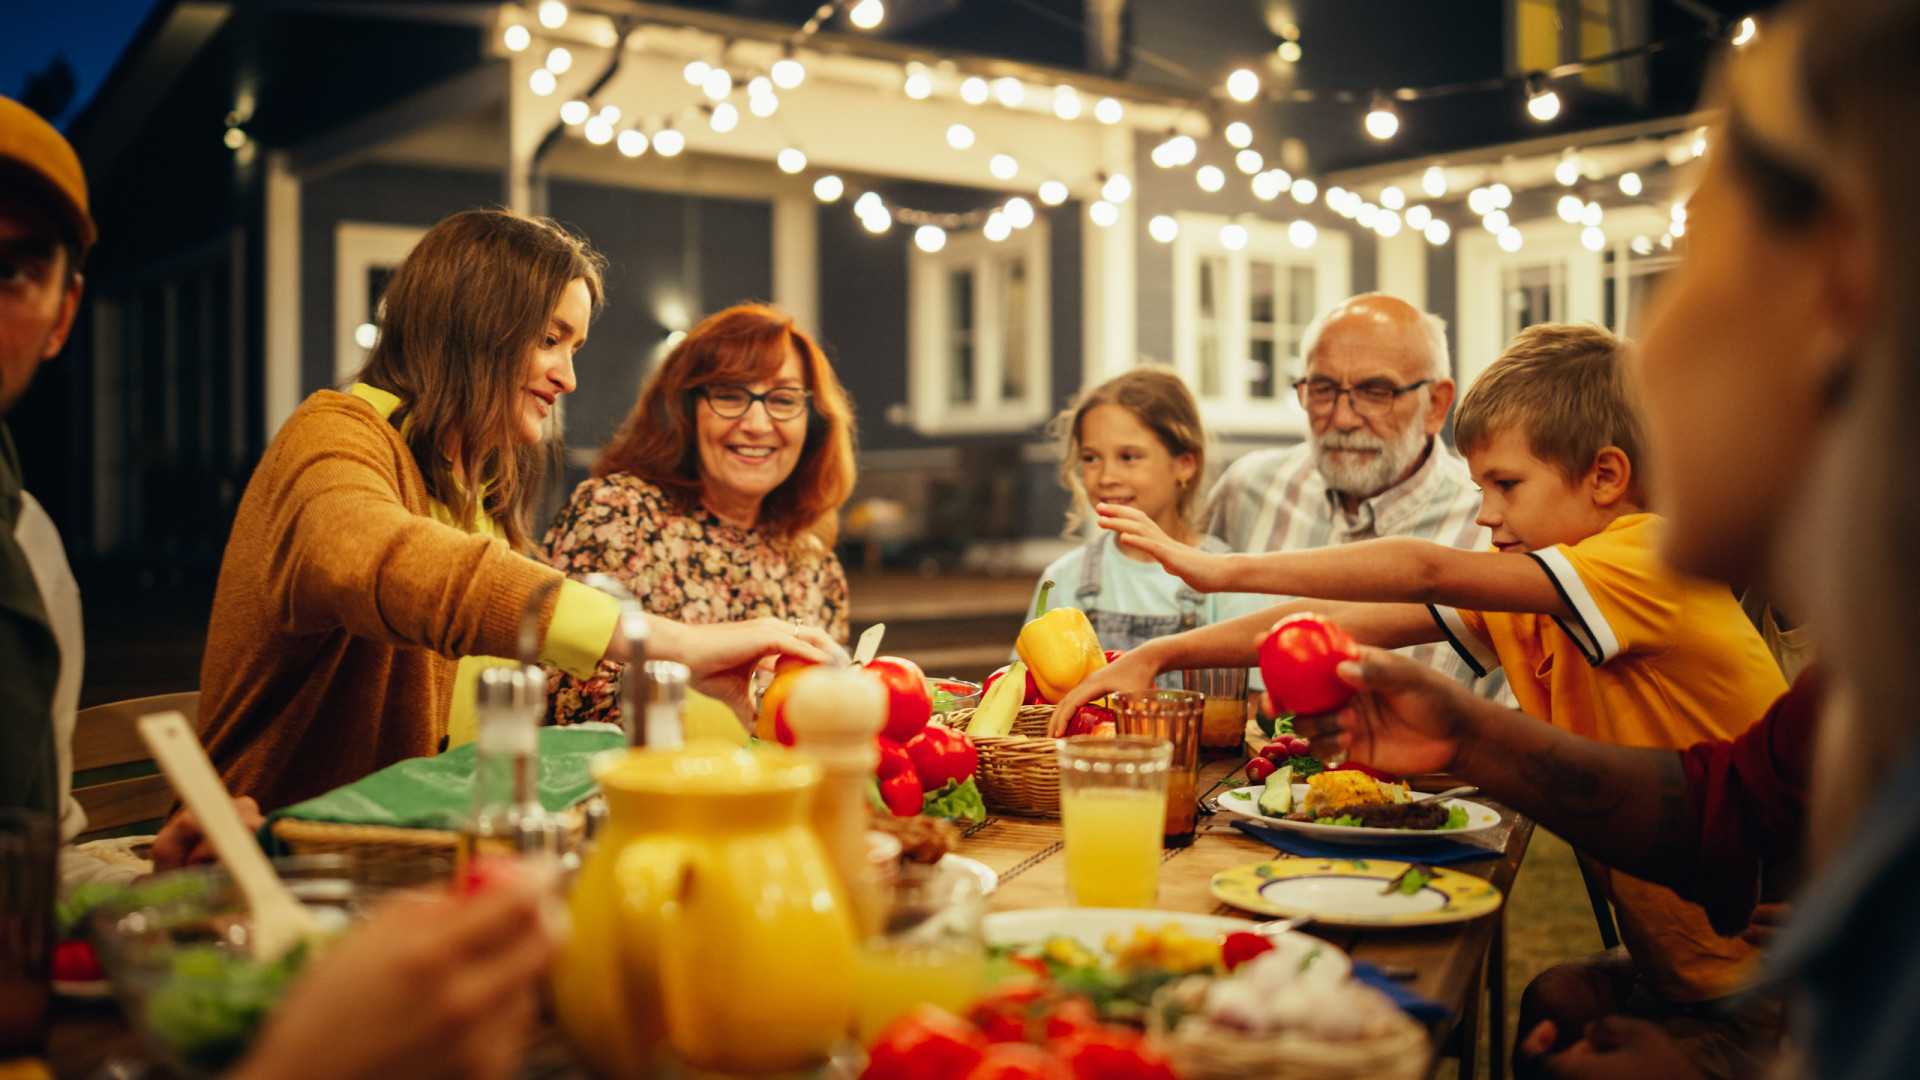 <p>A fun-filled, backyard cookout celebrating mom will be just the thing to make her day! Invite family and friends, coordinate responsibilities, and enjoy the outdoors.</p><p><a href="https://www.msn.com/en-us/community/channel/vid-7xx8mnucu55yw63we9va2gwr7uihbxwc68fxqp25x6tg4ftibpra?cvid=94631541bc0f4f89bfd59158d696ad7e">Follow us and access great exclusive content every day</a></p>